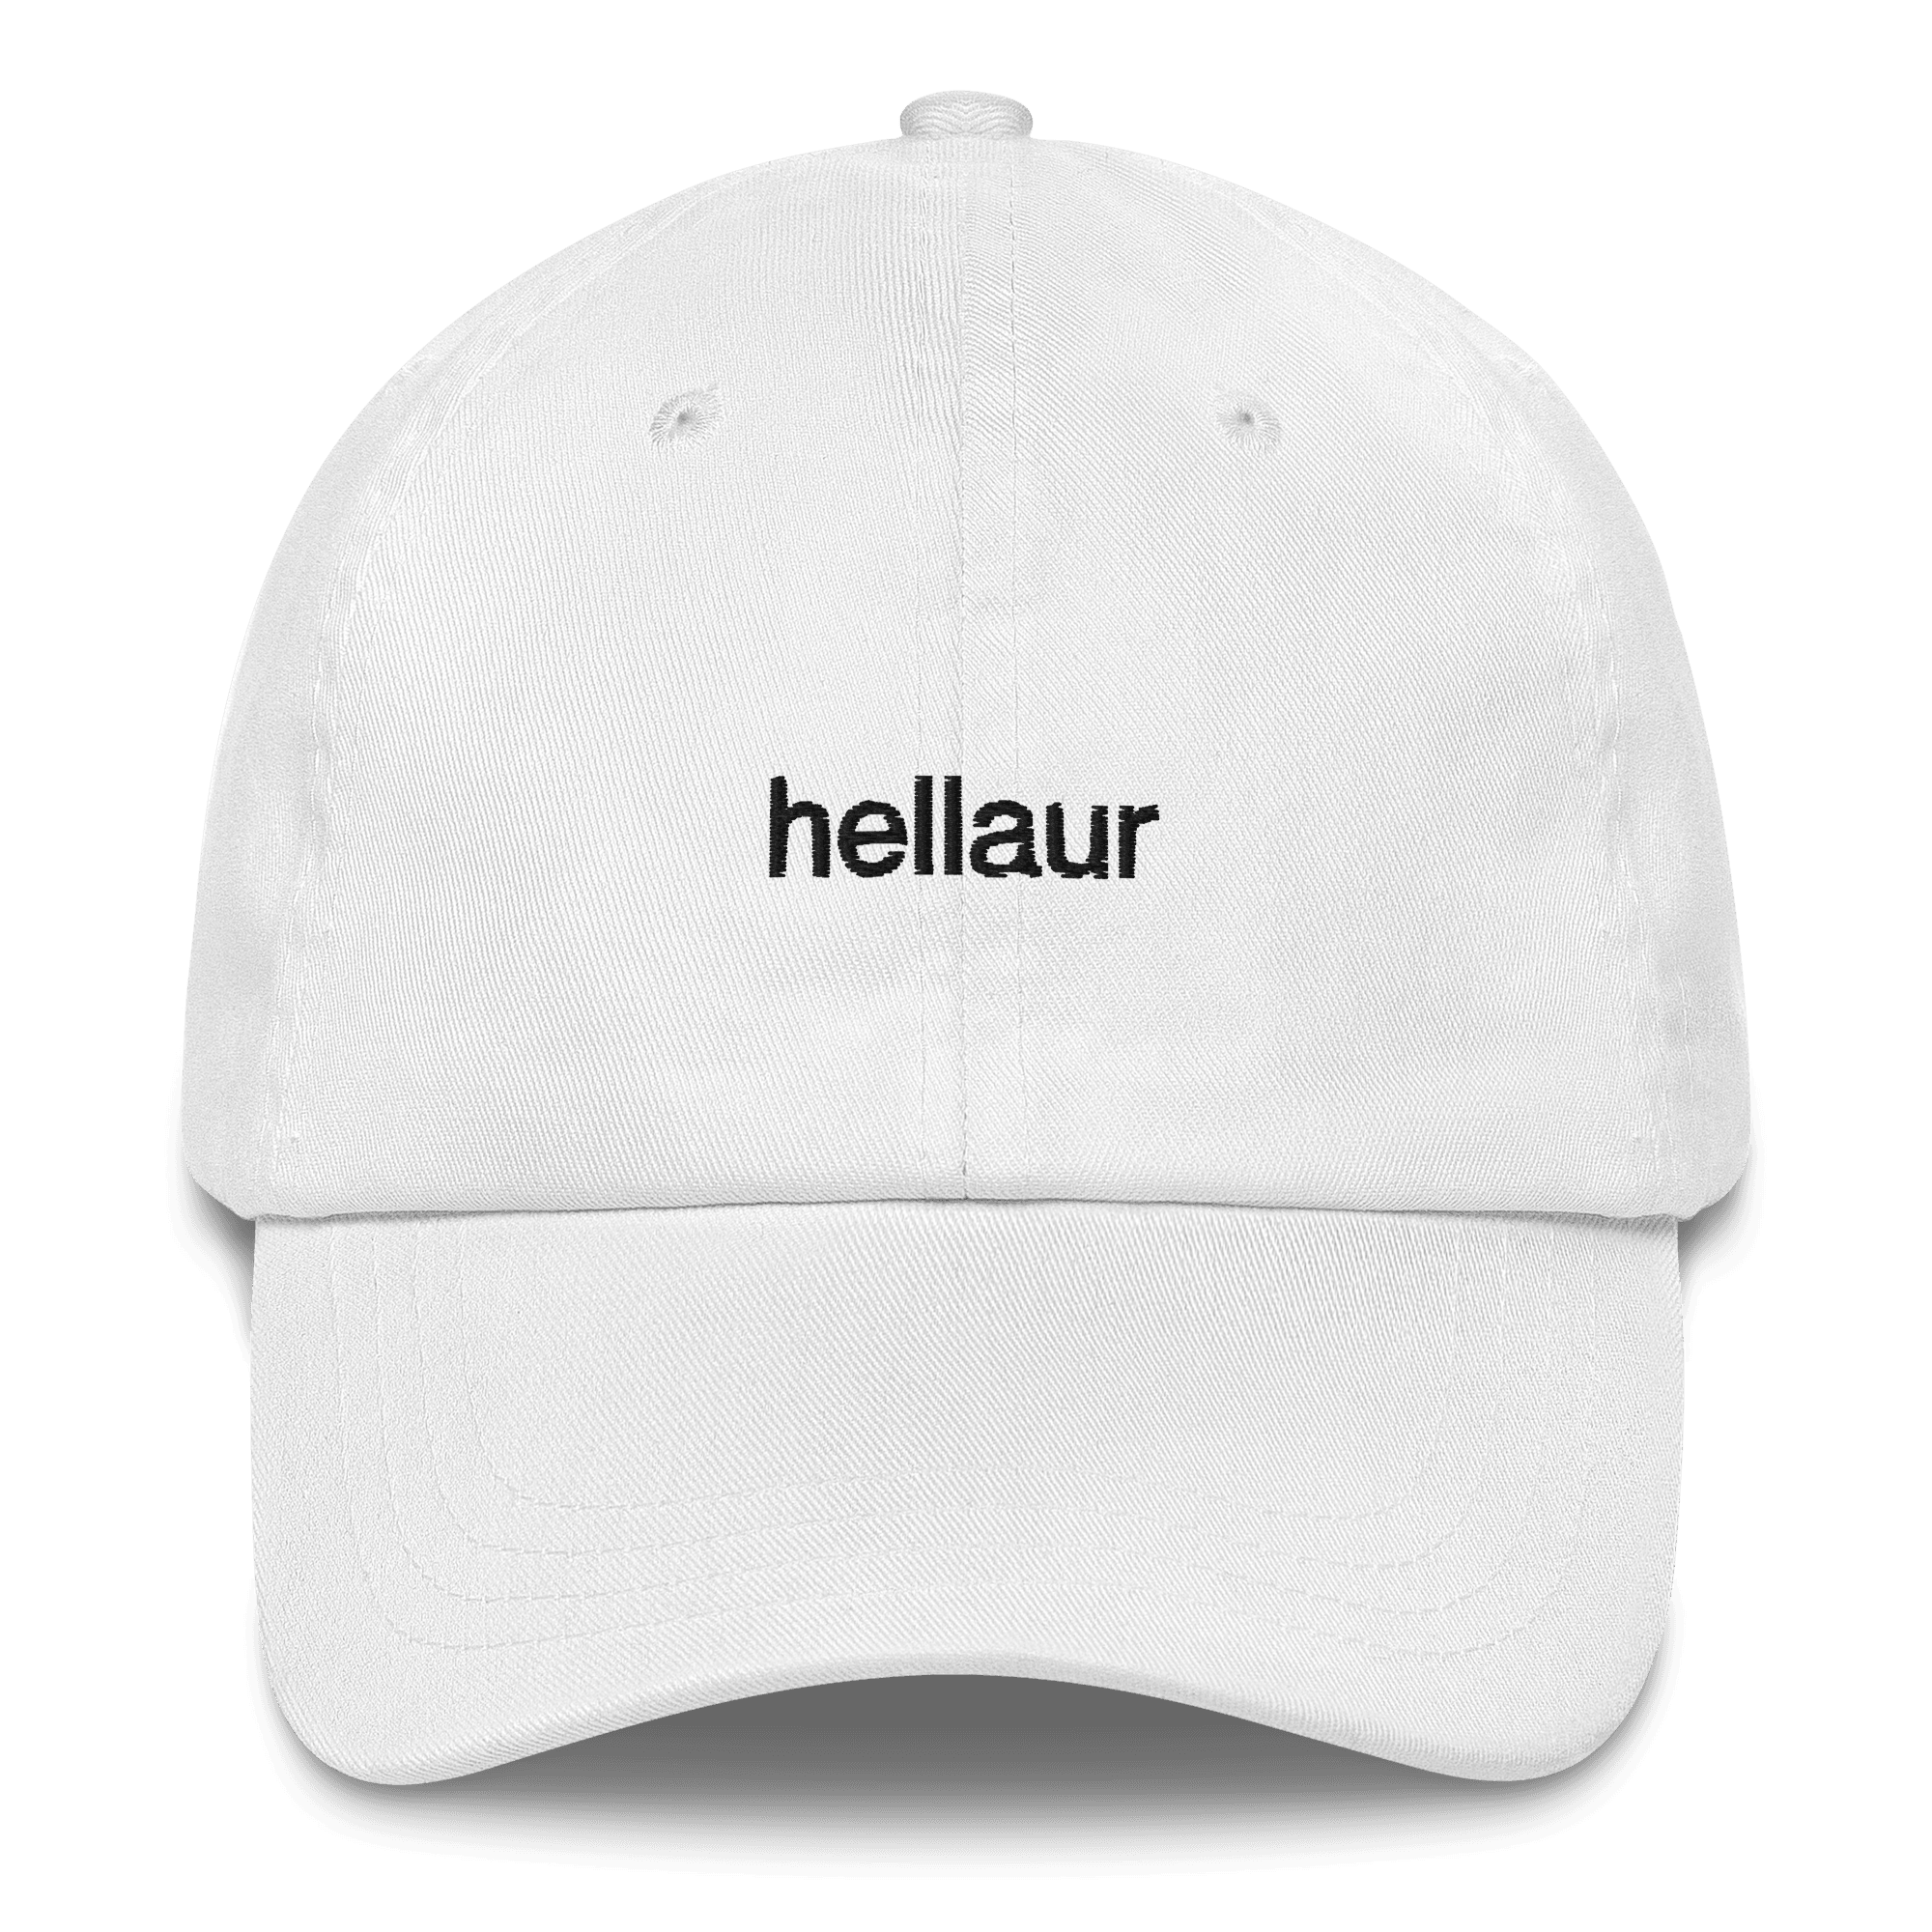 hellaur Embroidered Hat - Polychrome Goods 🍊